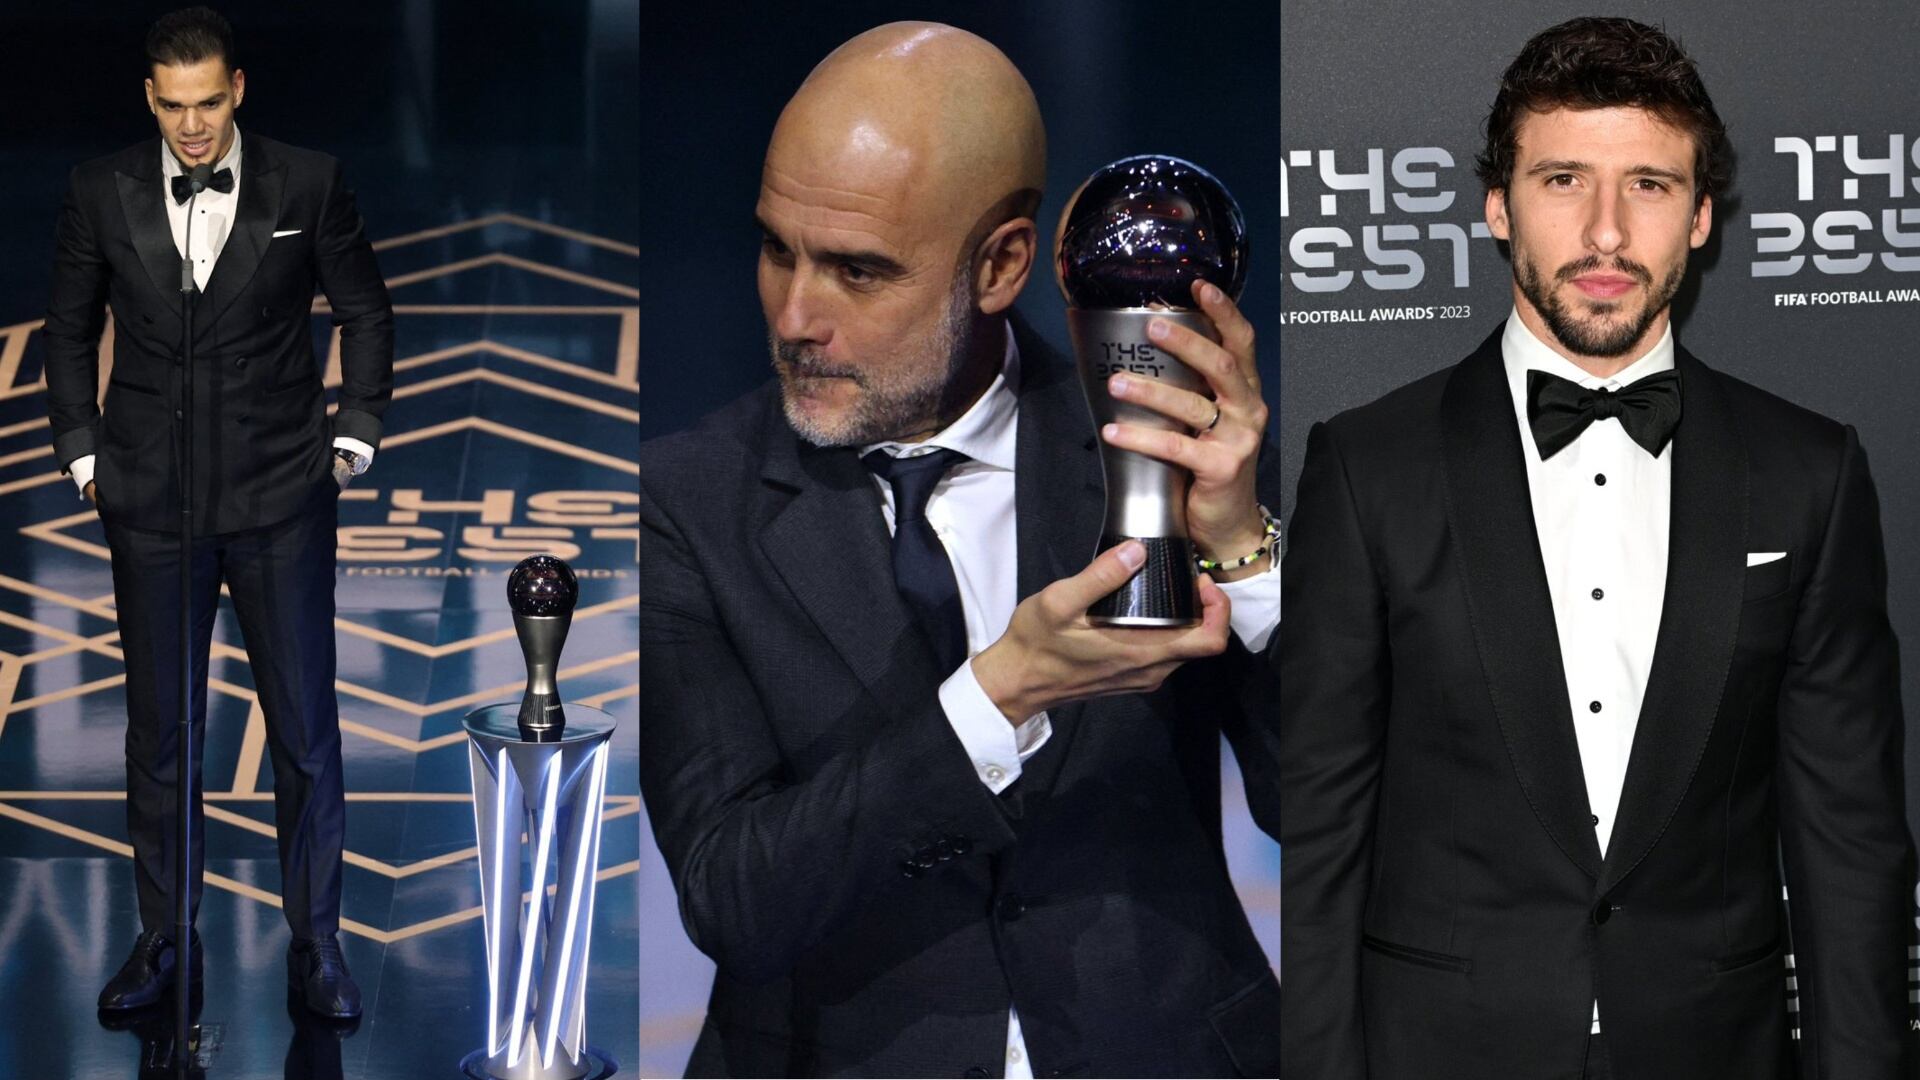 Manchester City dominates at the FIFA The Best award ceremony